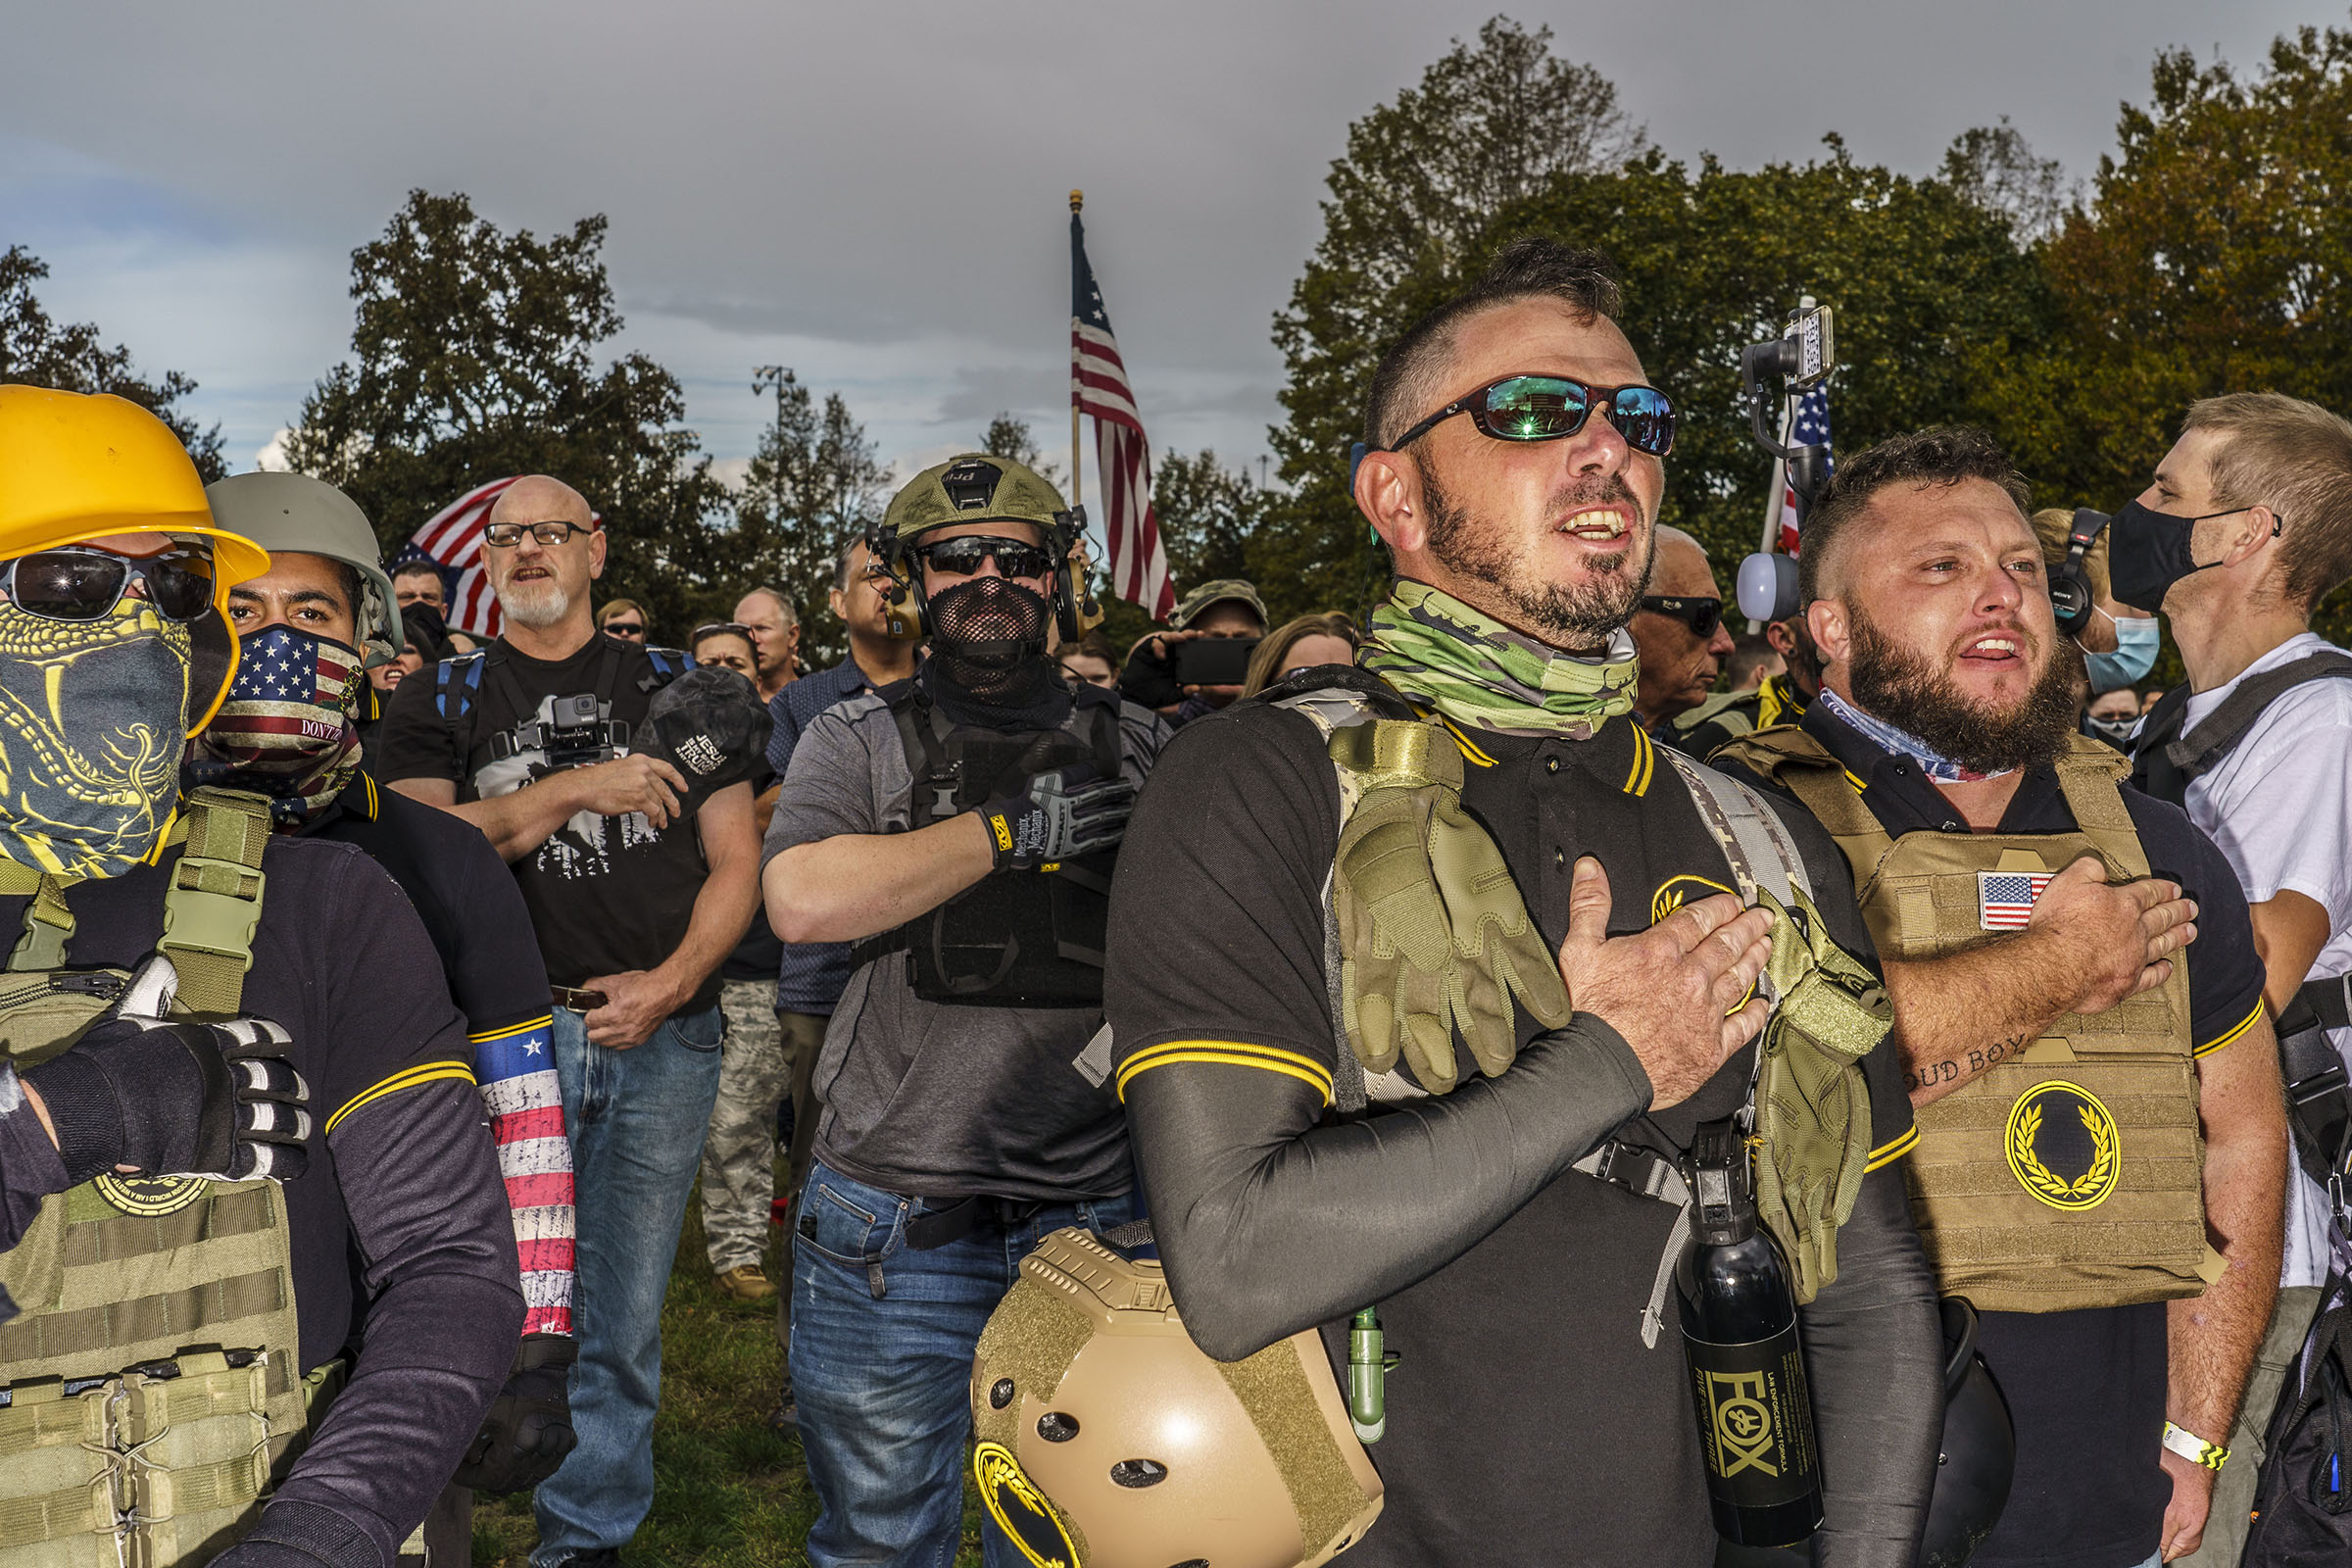 Hundreds of far-right Proud Boys and their supporters held a rally in Delta Park in Portland, Ore., on Sept. 26, 2020. (Mark Peterson—Redux)